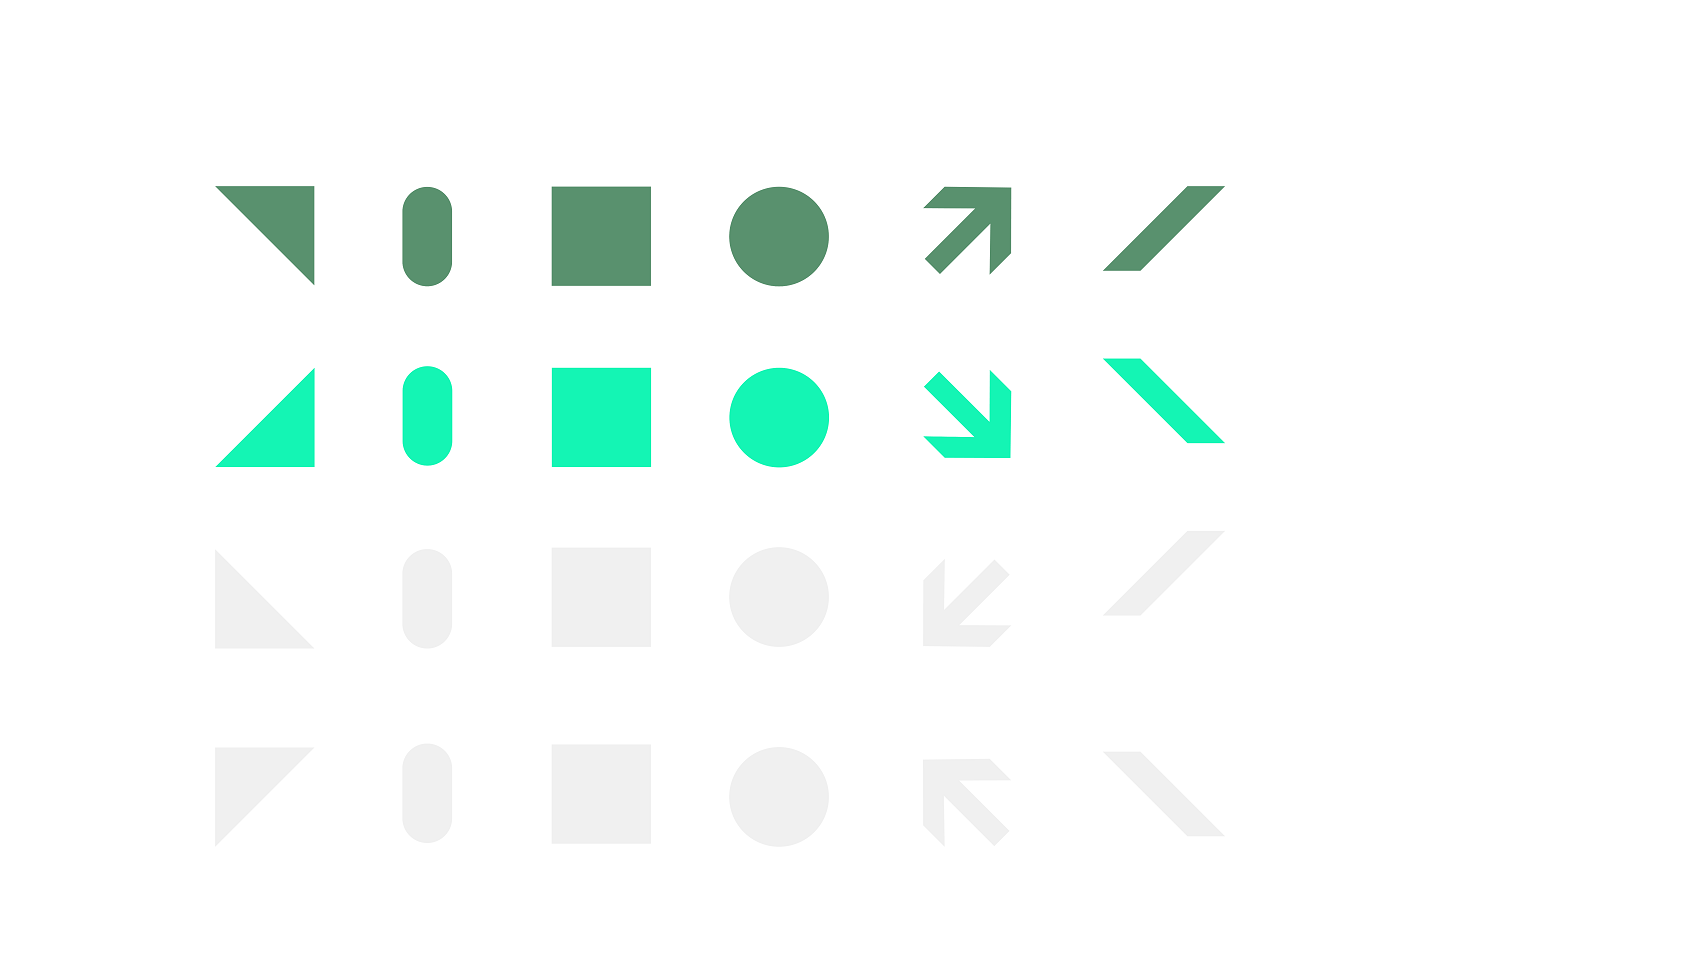 Dark green, light green and light grey geometric shapes on a white background